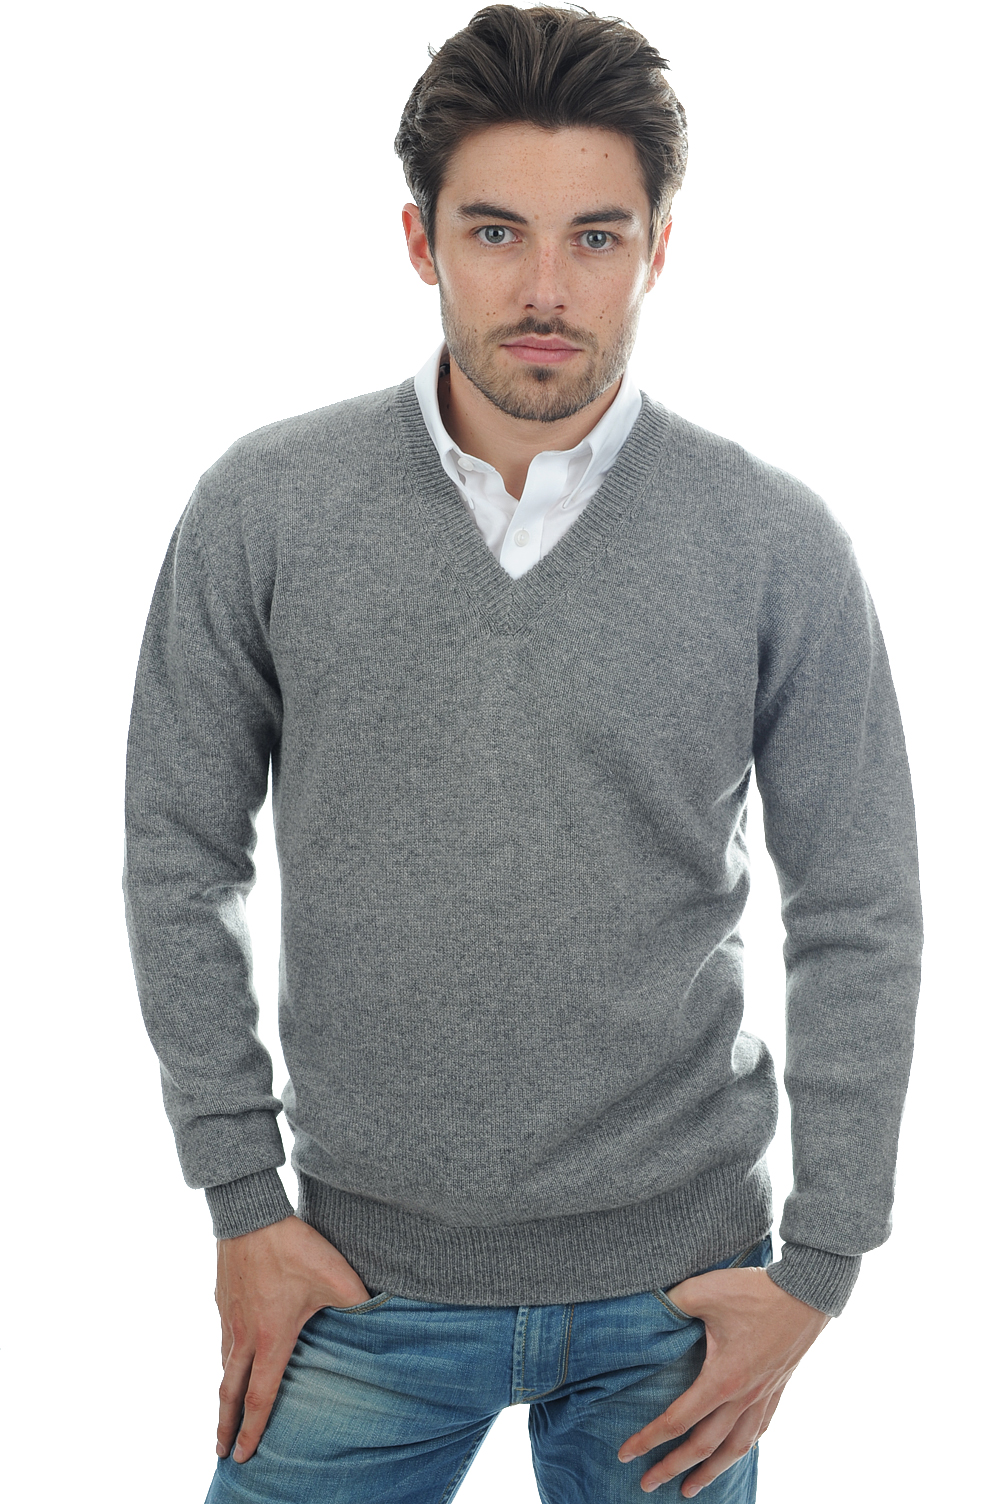 Cachemire pull homme hippolyte 4f gris chine 3xl